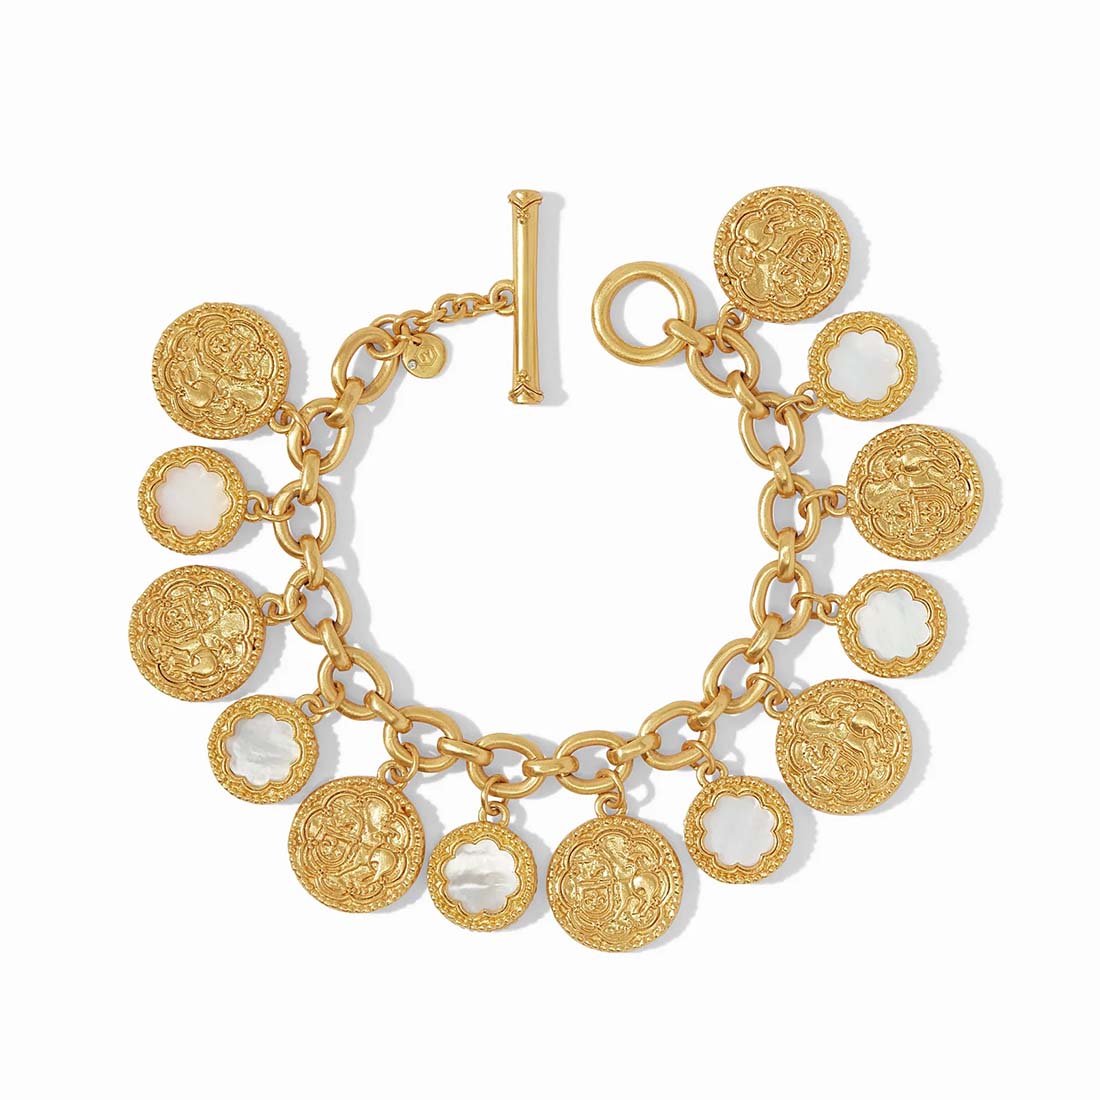 Buy Johori Handcrafted Gold Plated Coin Bracelet Online